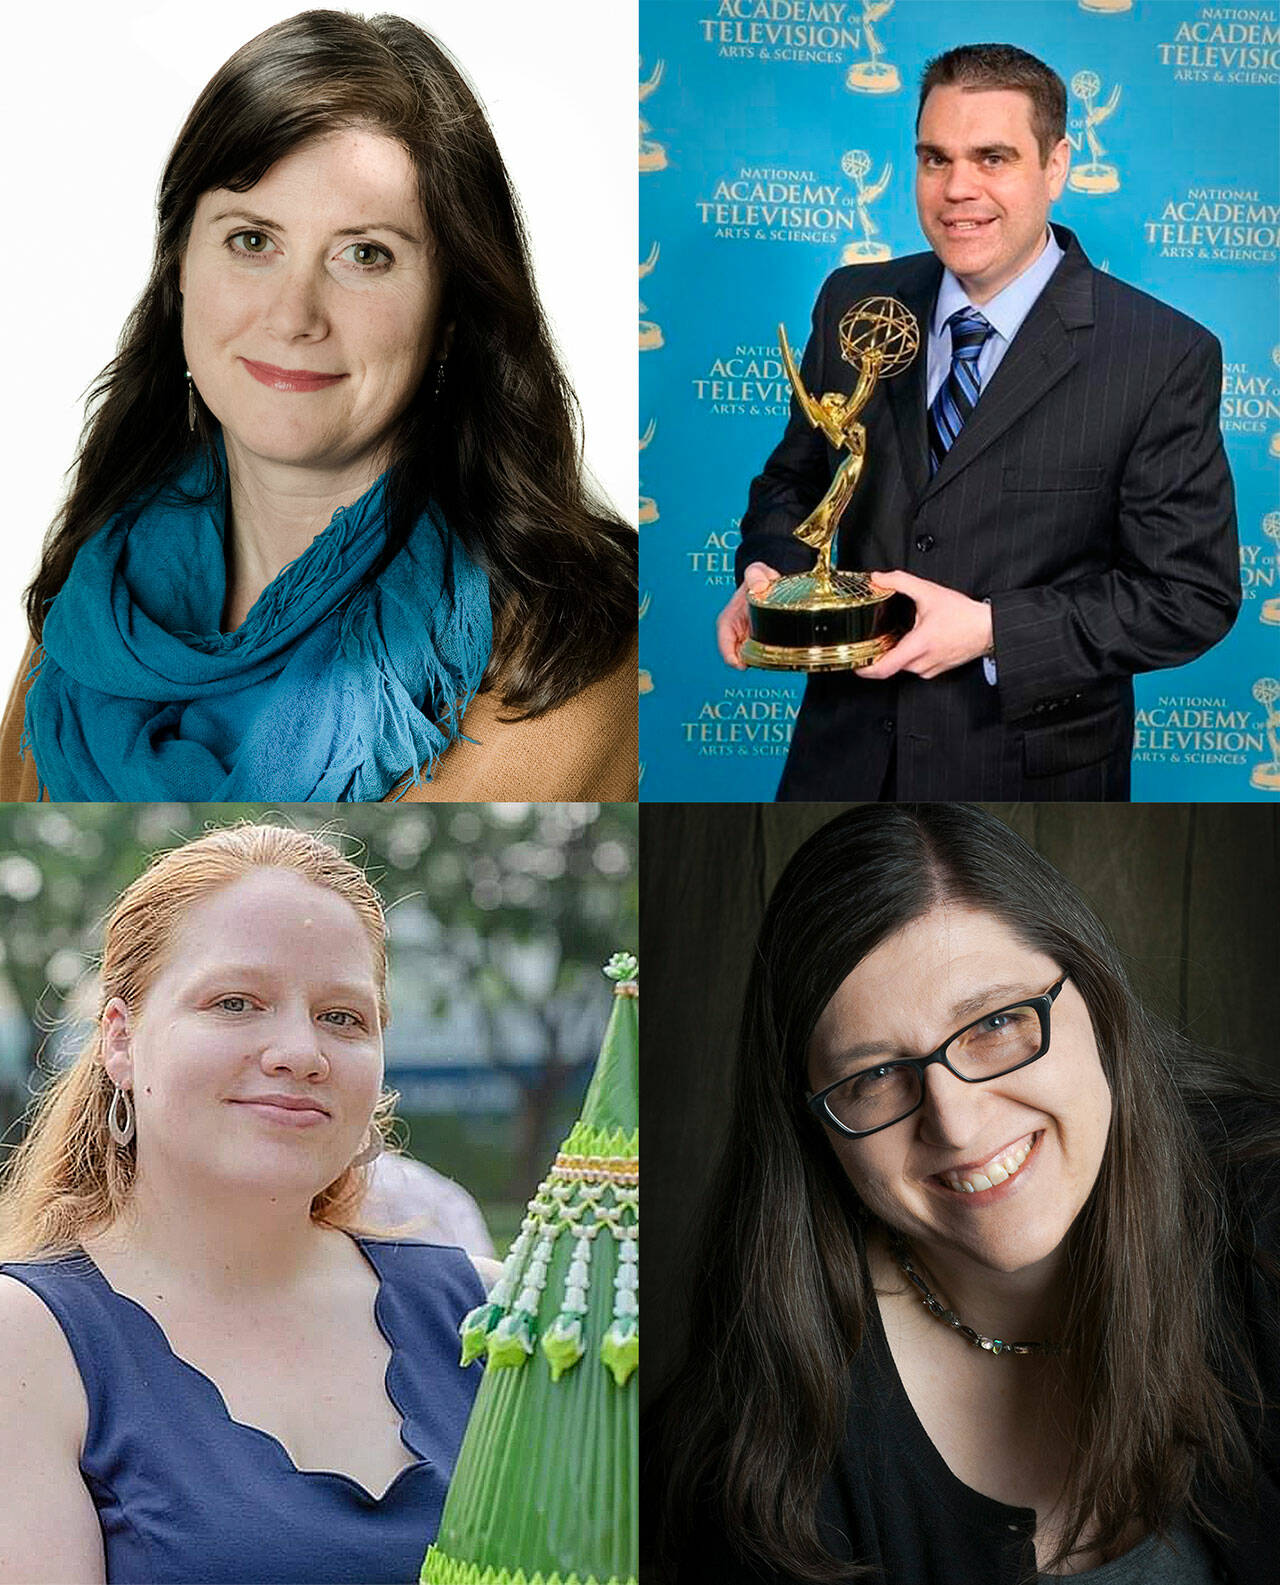 Among the speakers slated for Peninsula College's “Careers in Communication” on Oct. 27 are (clockwise, from top left) Daysha Eaton, Kevin Jackson, Heather Bloyer and Liz Leigh. Submitted photos